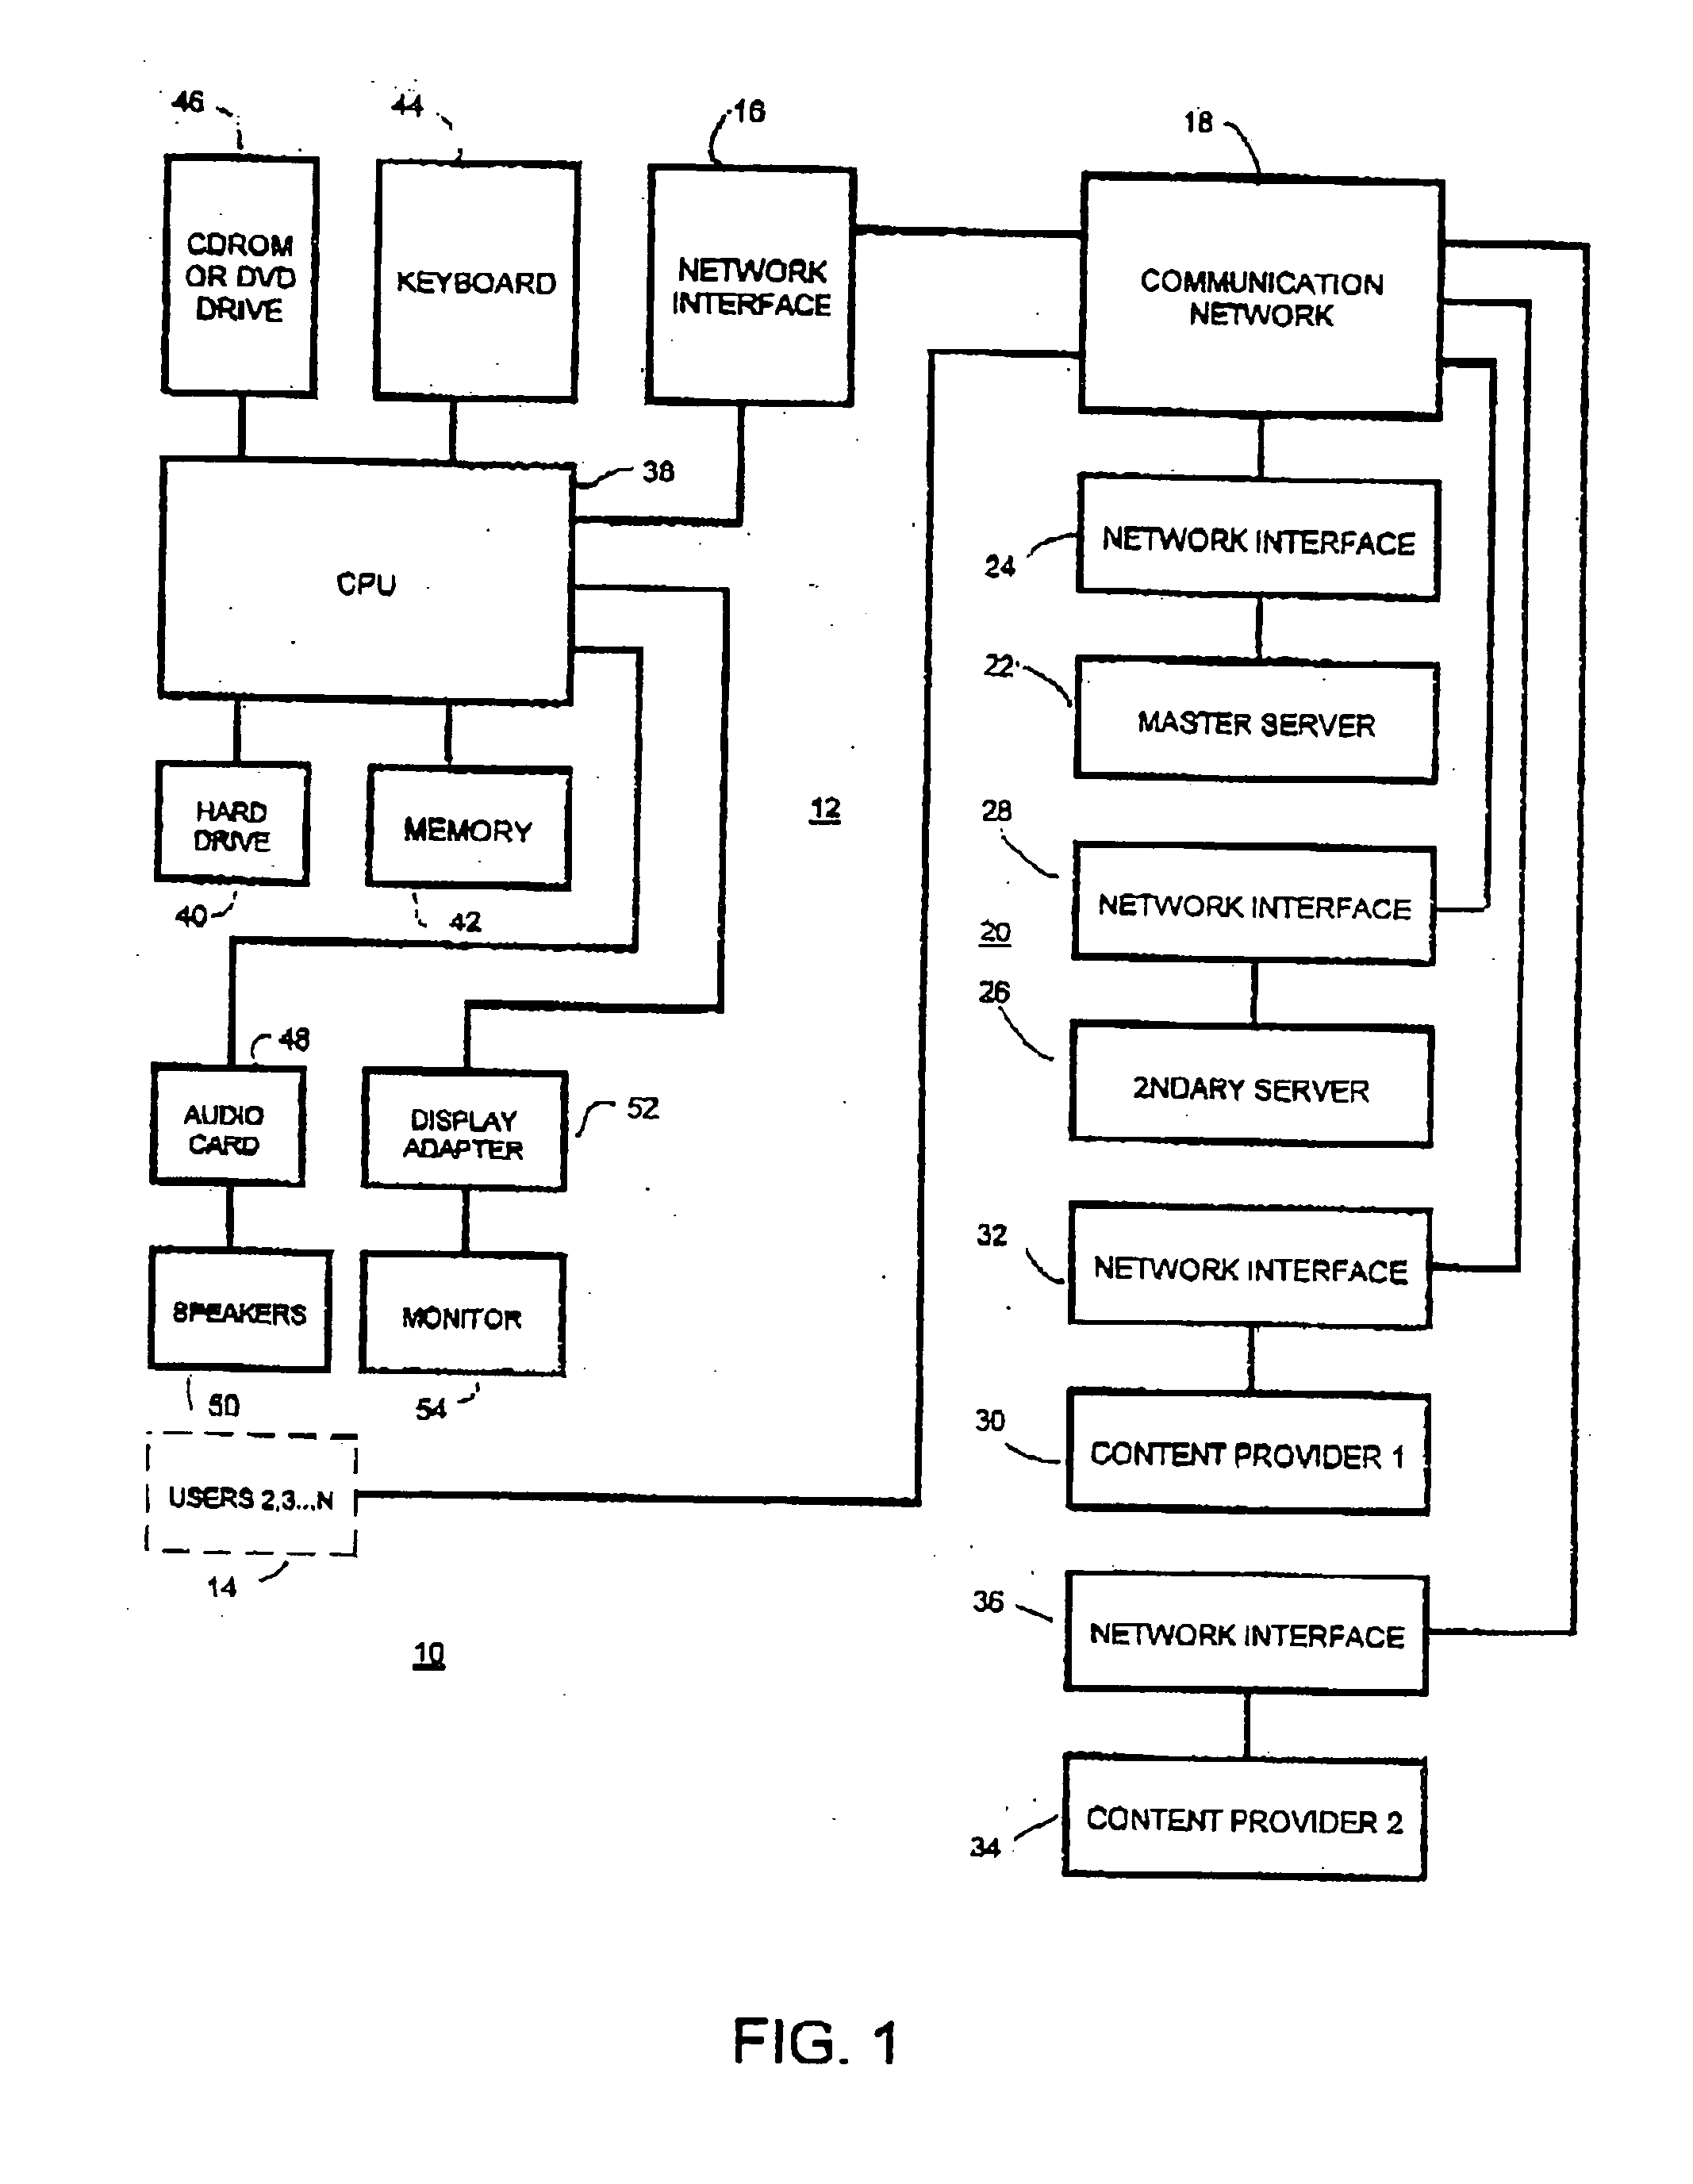 System and method for disseminating information over a communication network according to predefined consumer profiles